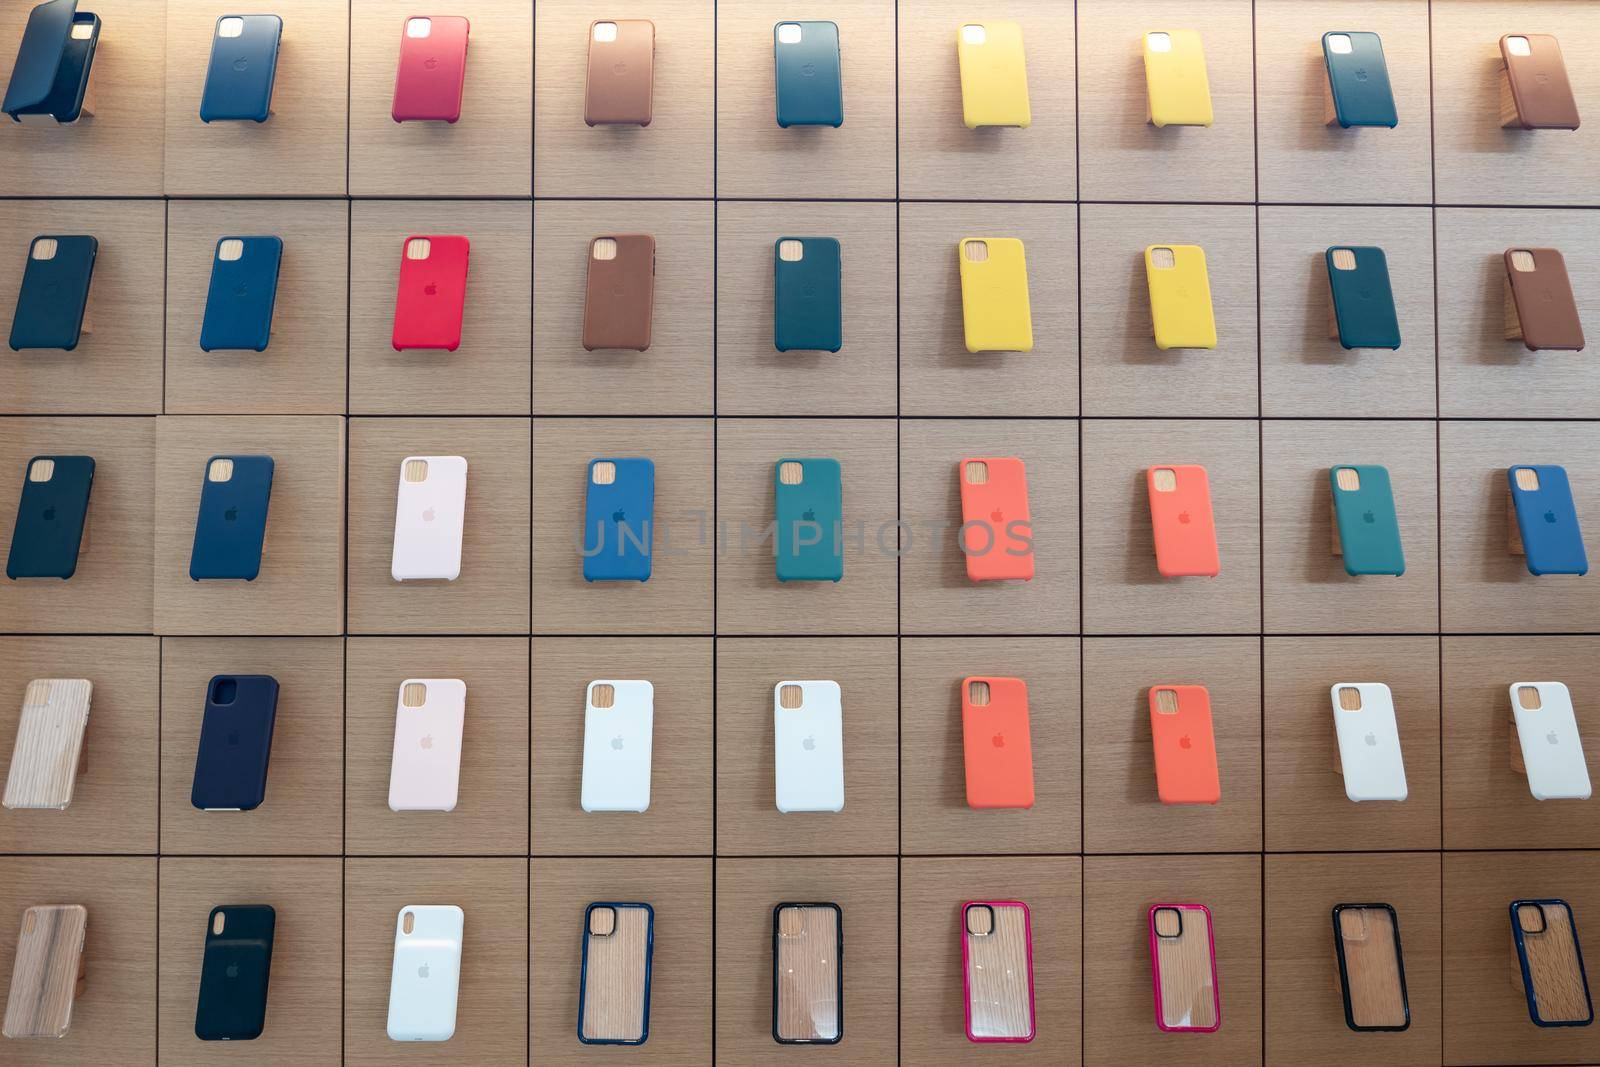 AVENTURA, FLORIDA, USA - SEPTEMBER 20, 2019: Apple iphone 11 series protection cases hanging on the wall in Apple store in the Aventura Mall